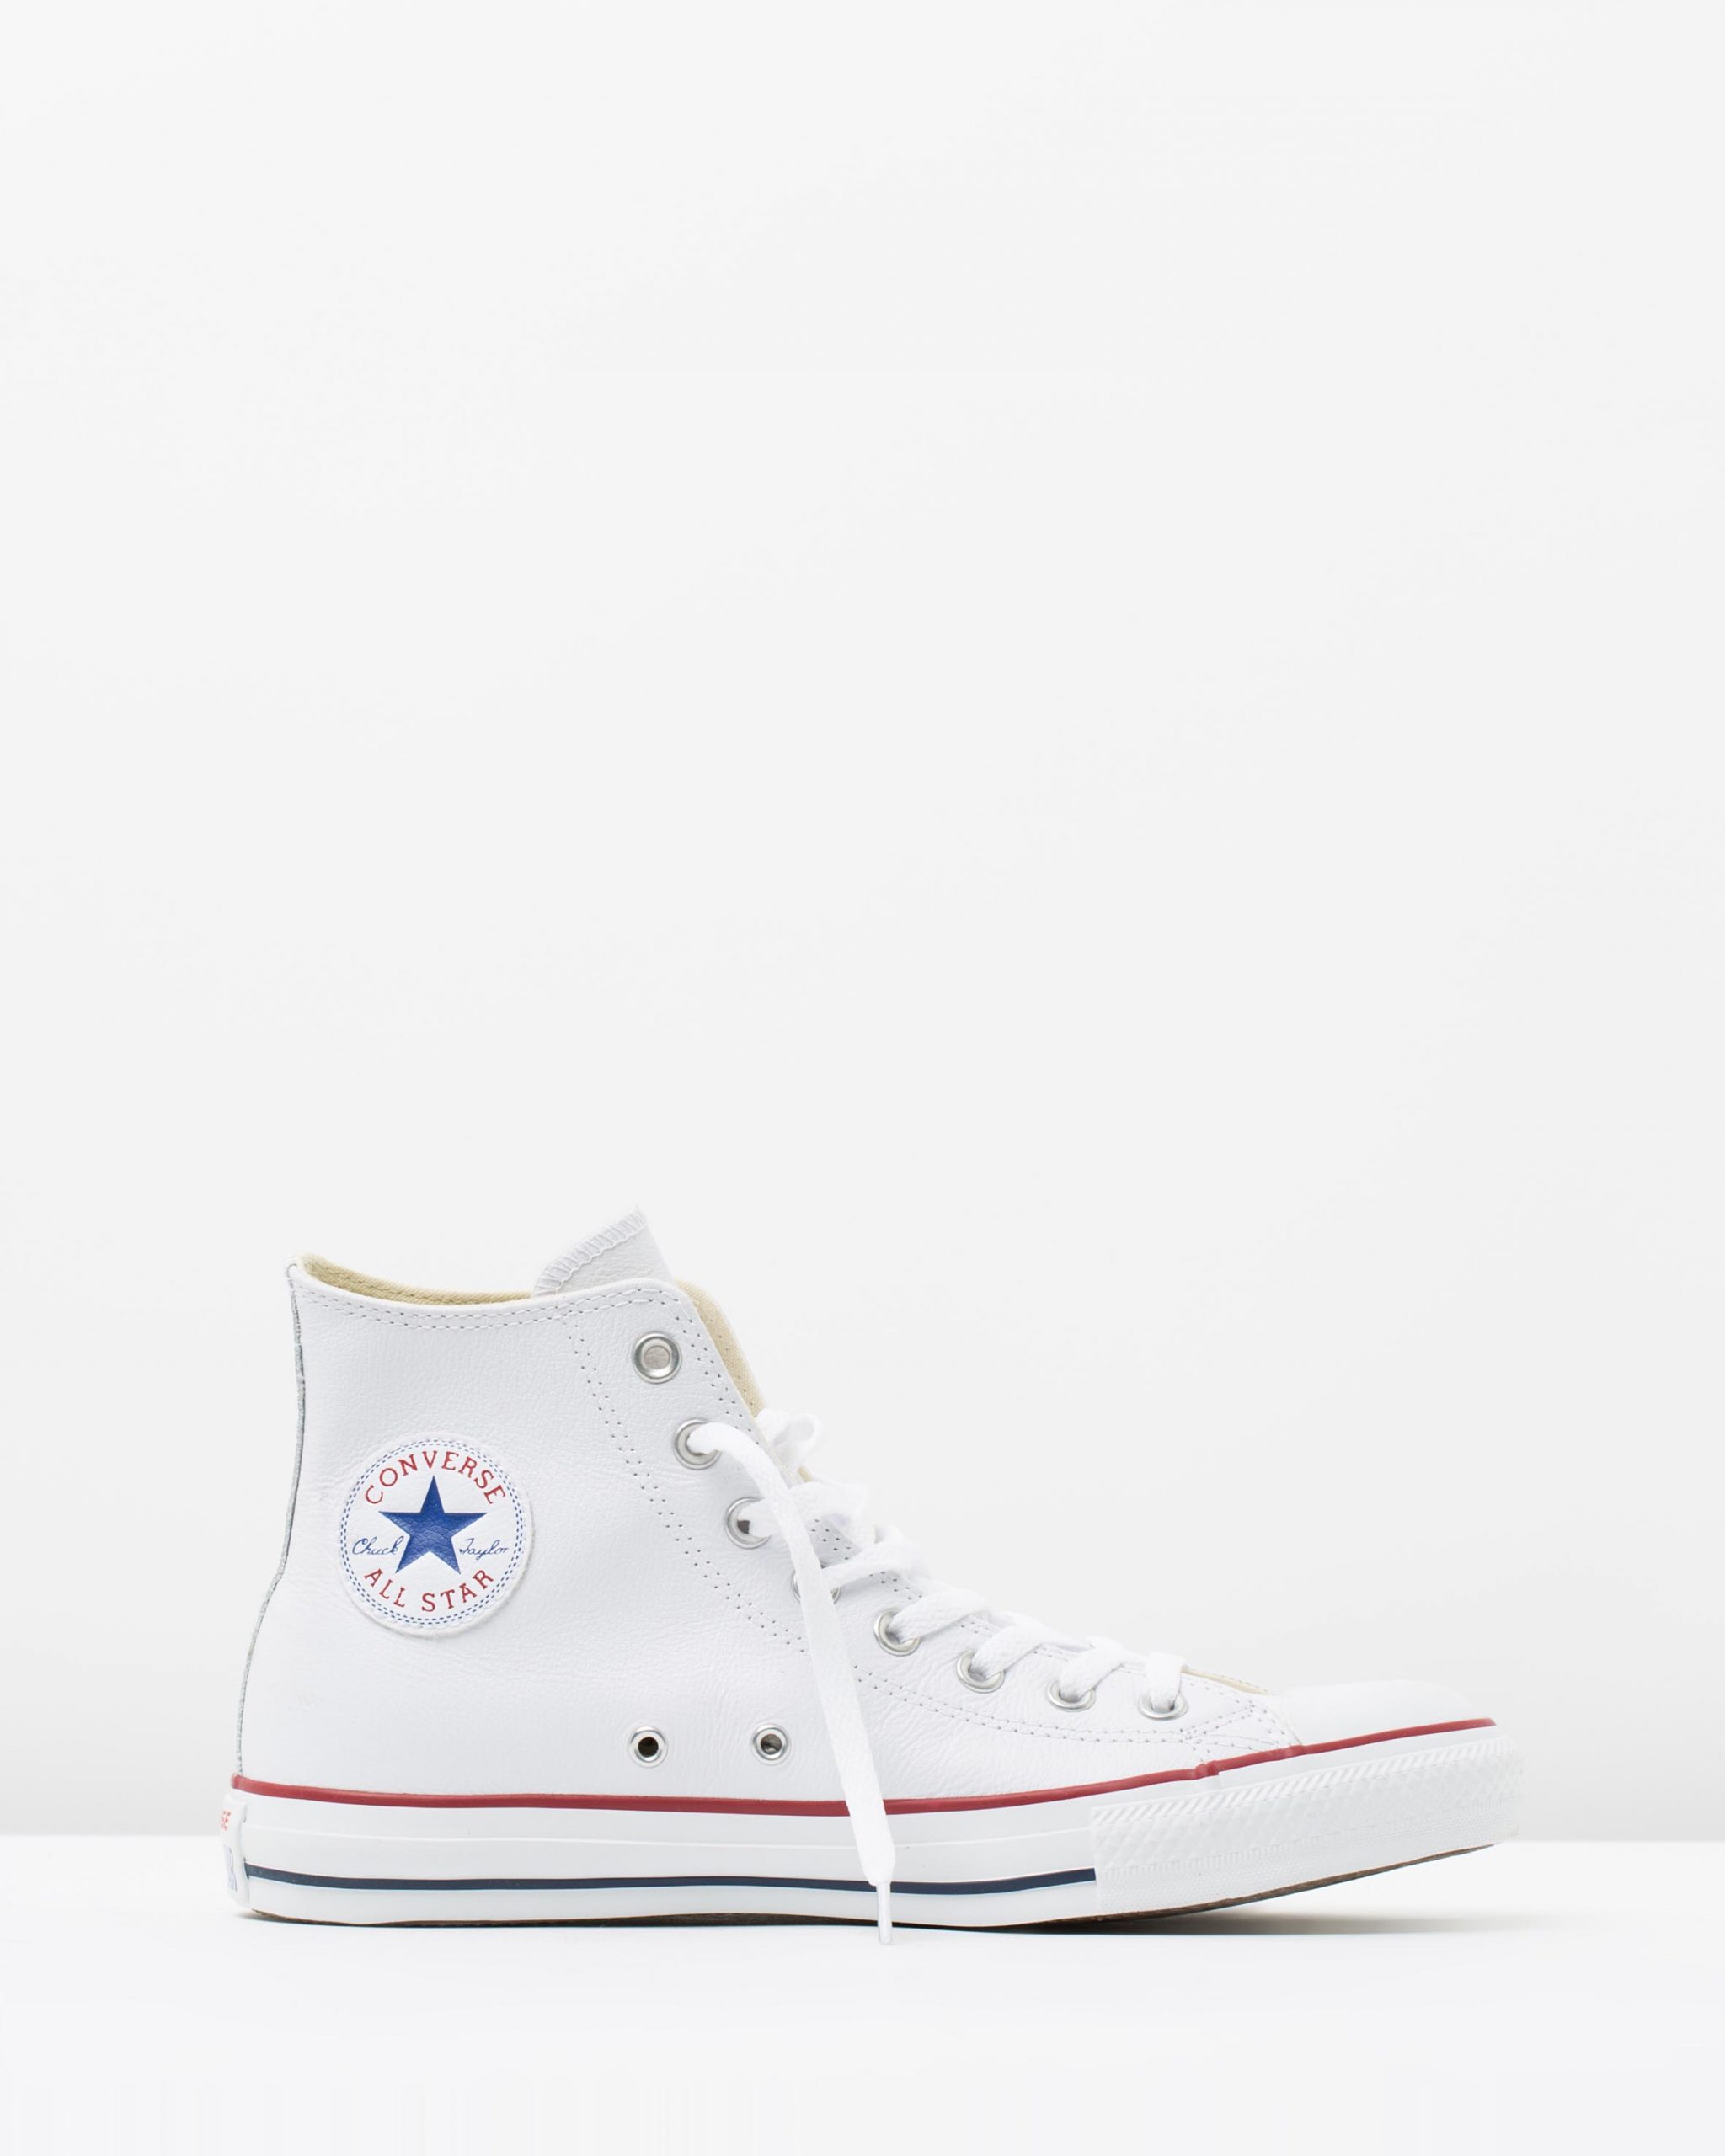 Converse Chuck Taylor All Star Leather Hi White